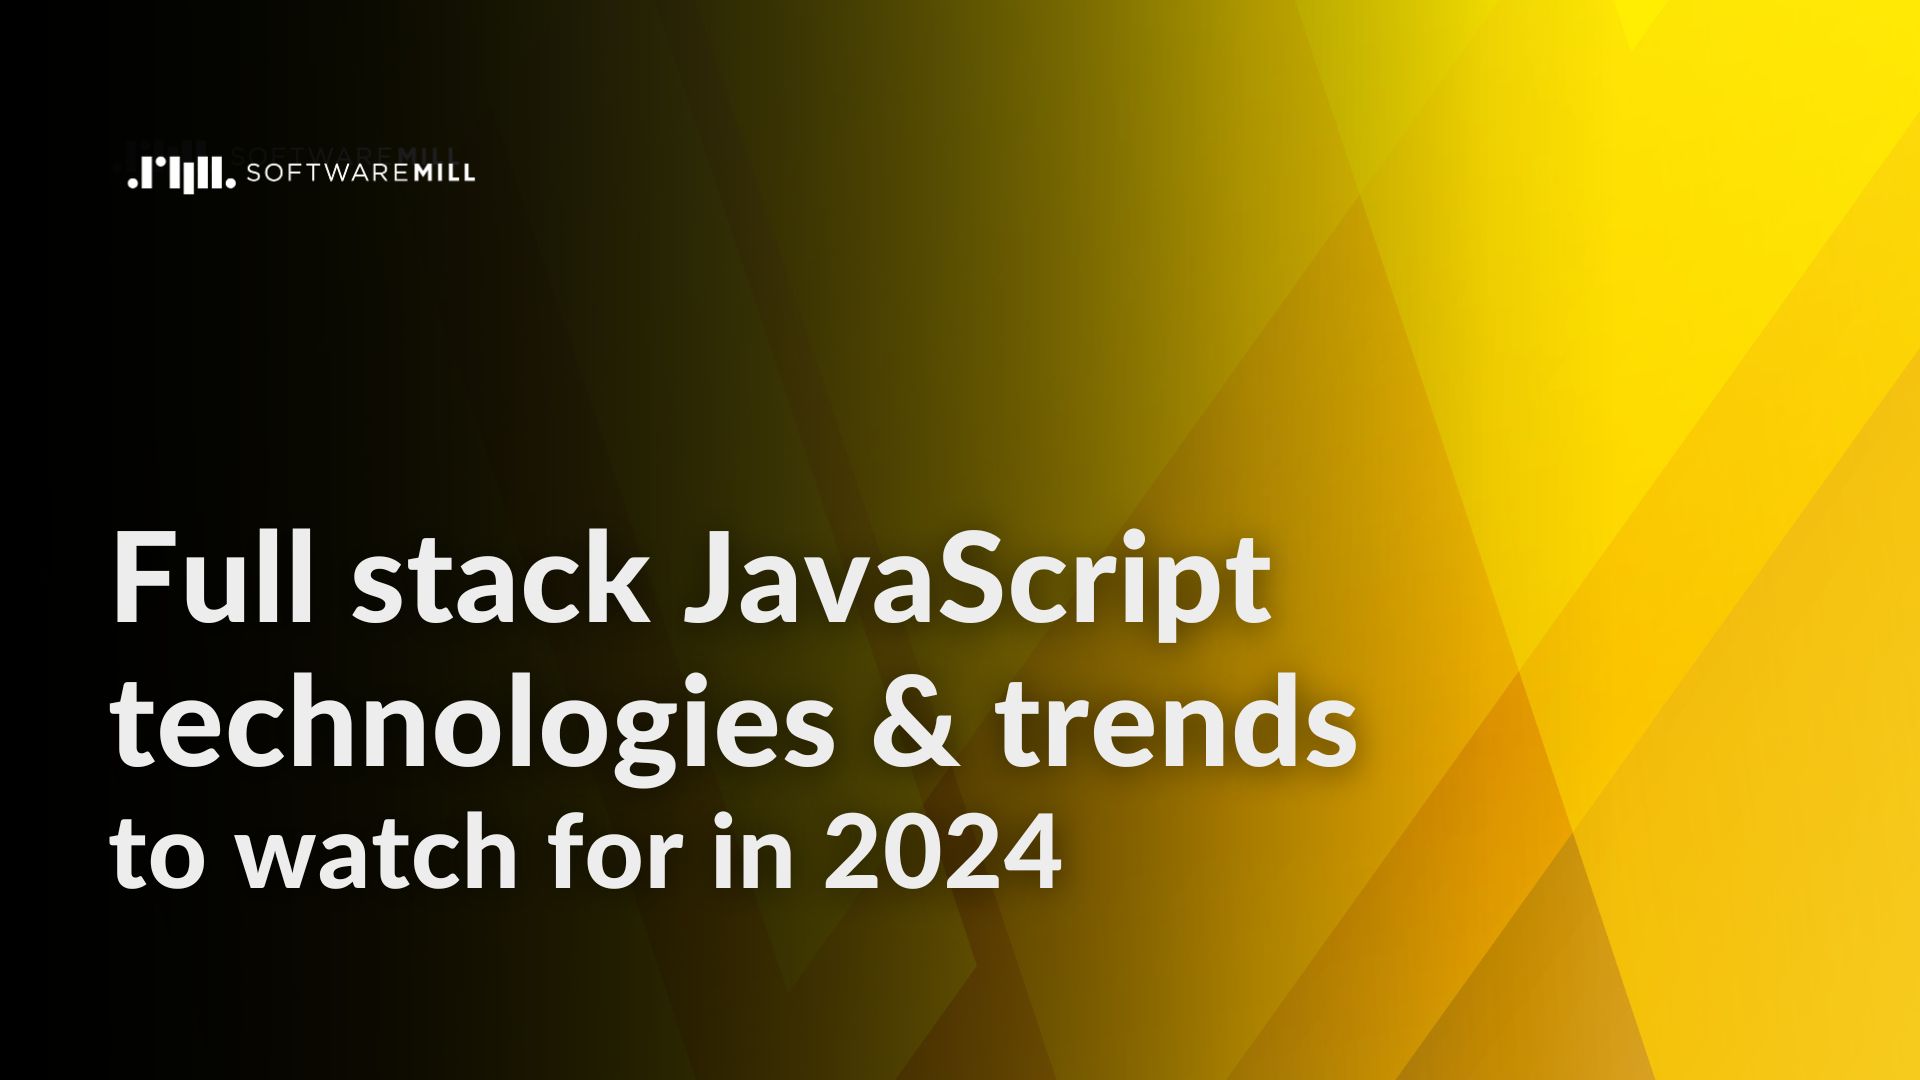 Full stack JavaScript technologies & trends to watch for in 2024 webp image